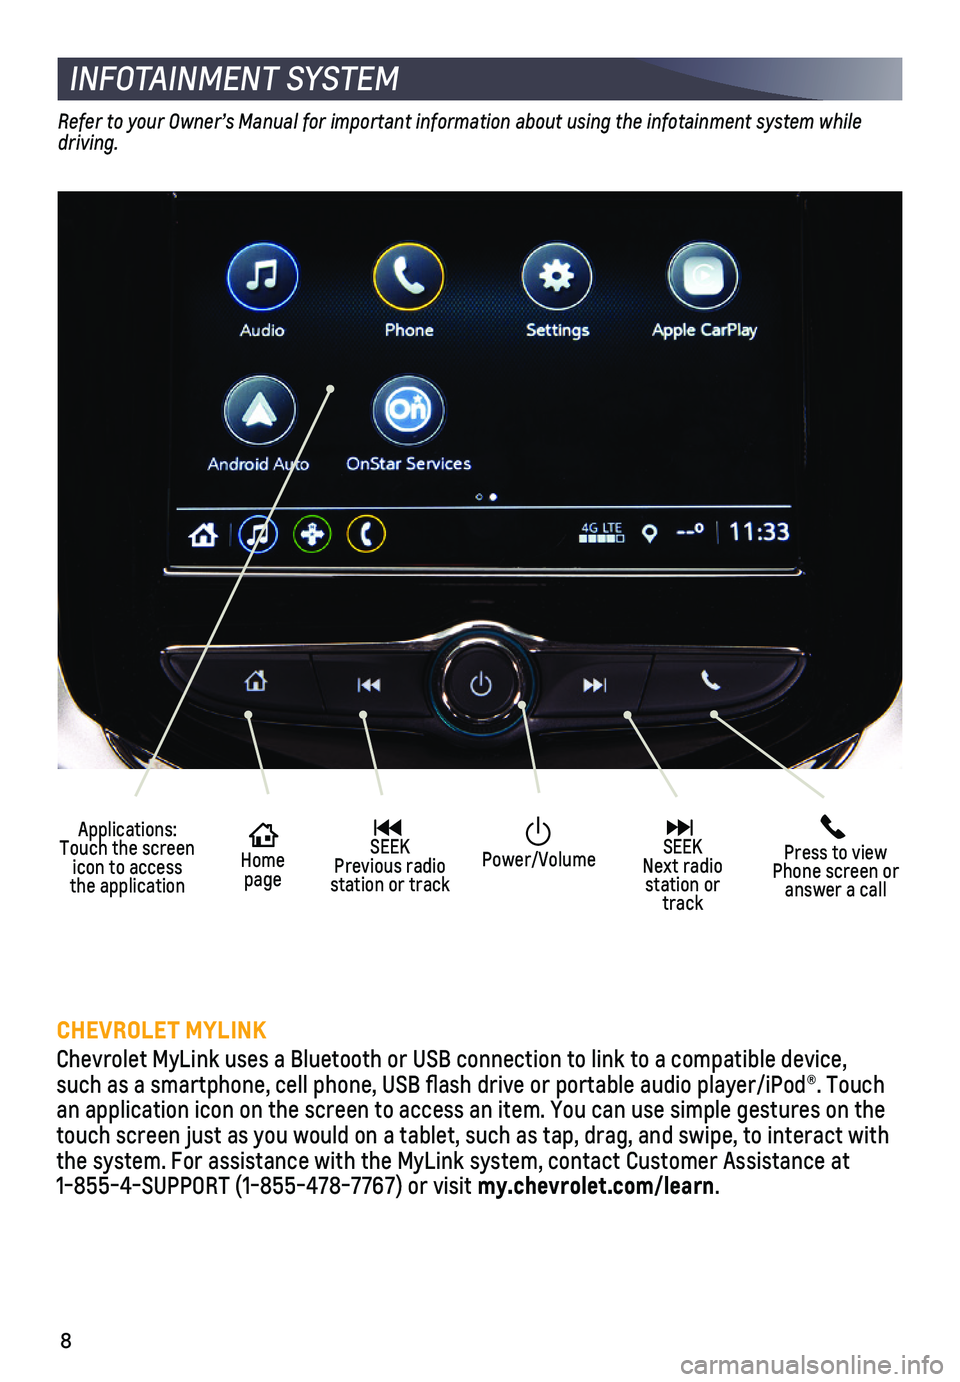 CHEVROLET SONIC 2018  Get To Know Guide 8
INFOTAINMENT SYSTEM
Refer to your Owner’s Manual for important information about using the infotainment system while driving.
CHEVROLET MYLINK
Chevrolet MyLink uses a Bluetooth or USB connection t